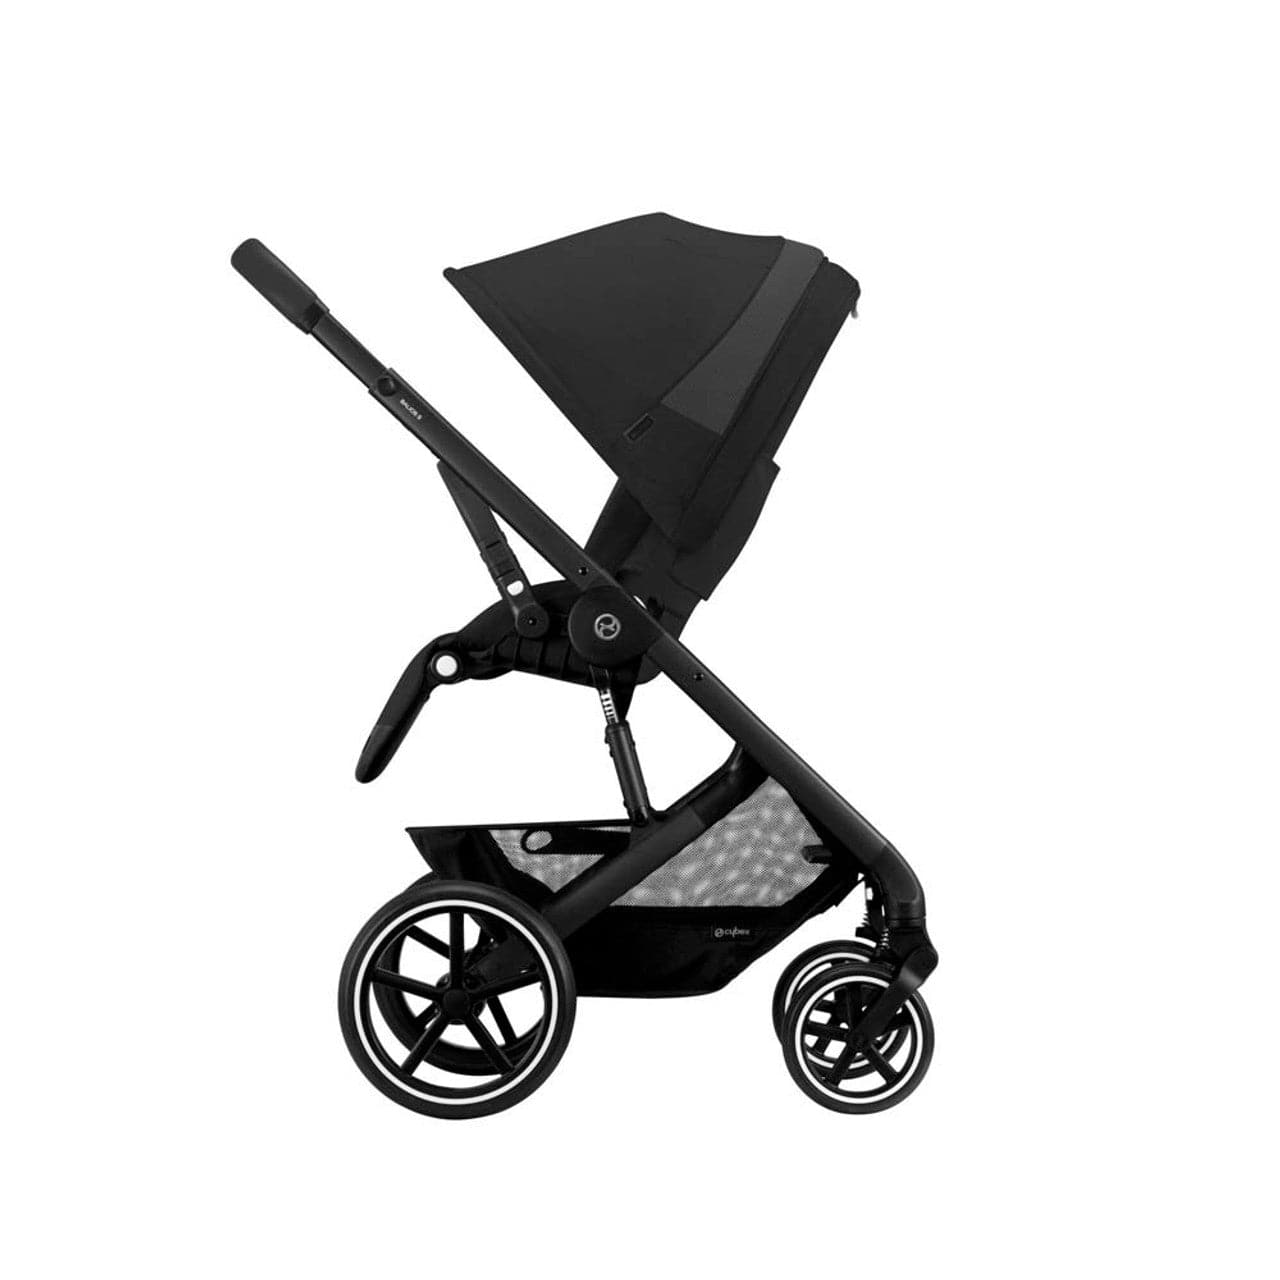 Cybex Balios S Lux 10 Piece Luxury Travel System Bundle- Moon Black - For Your Little One